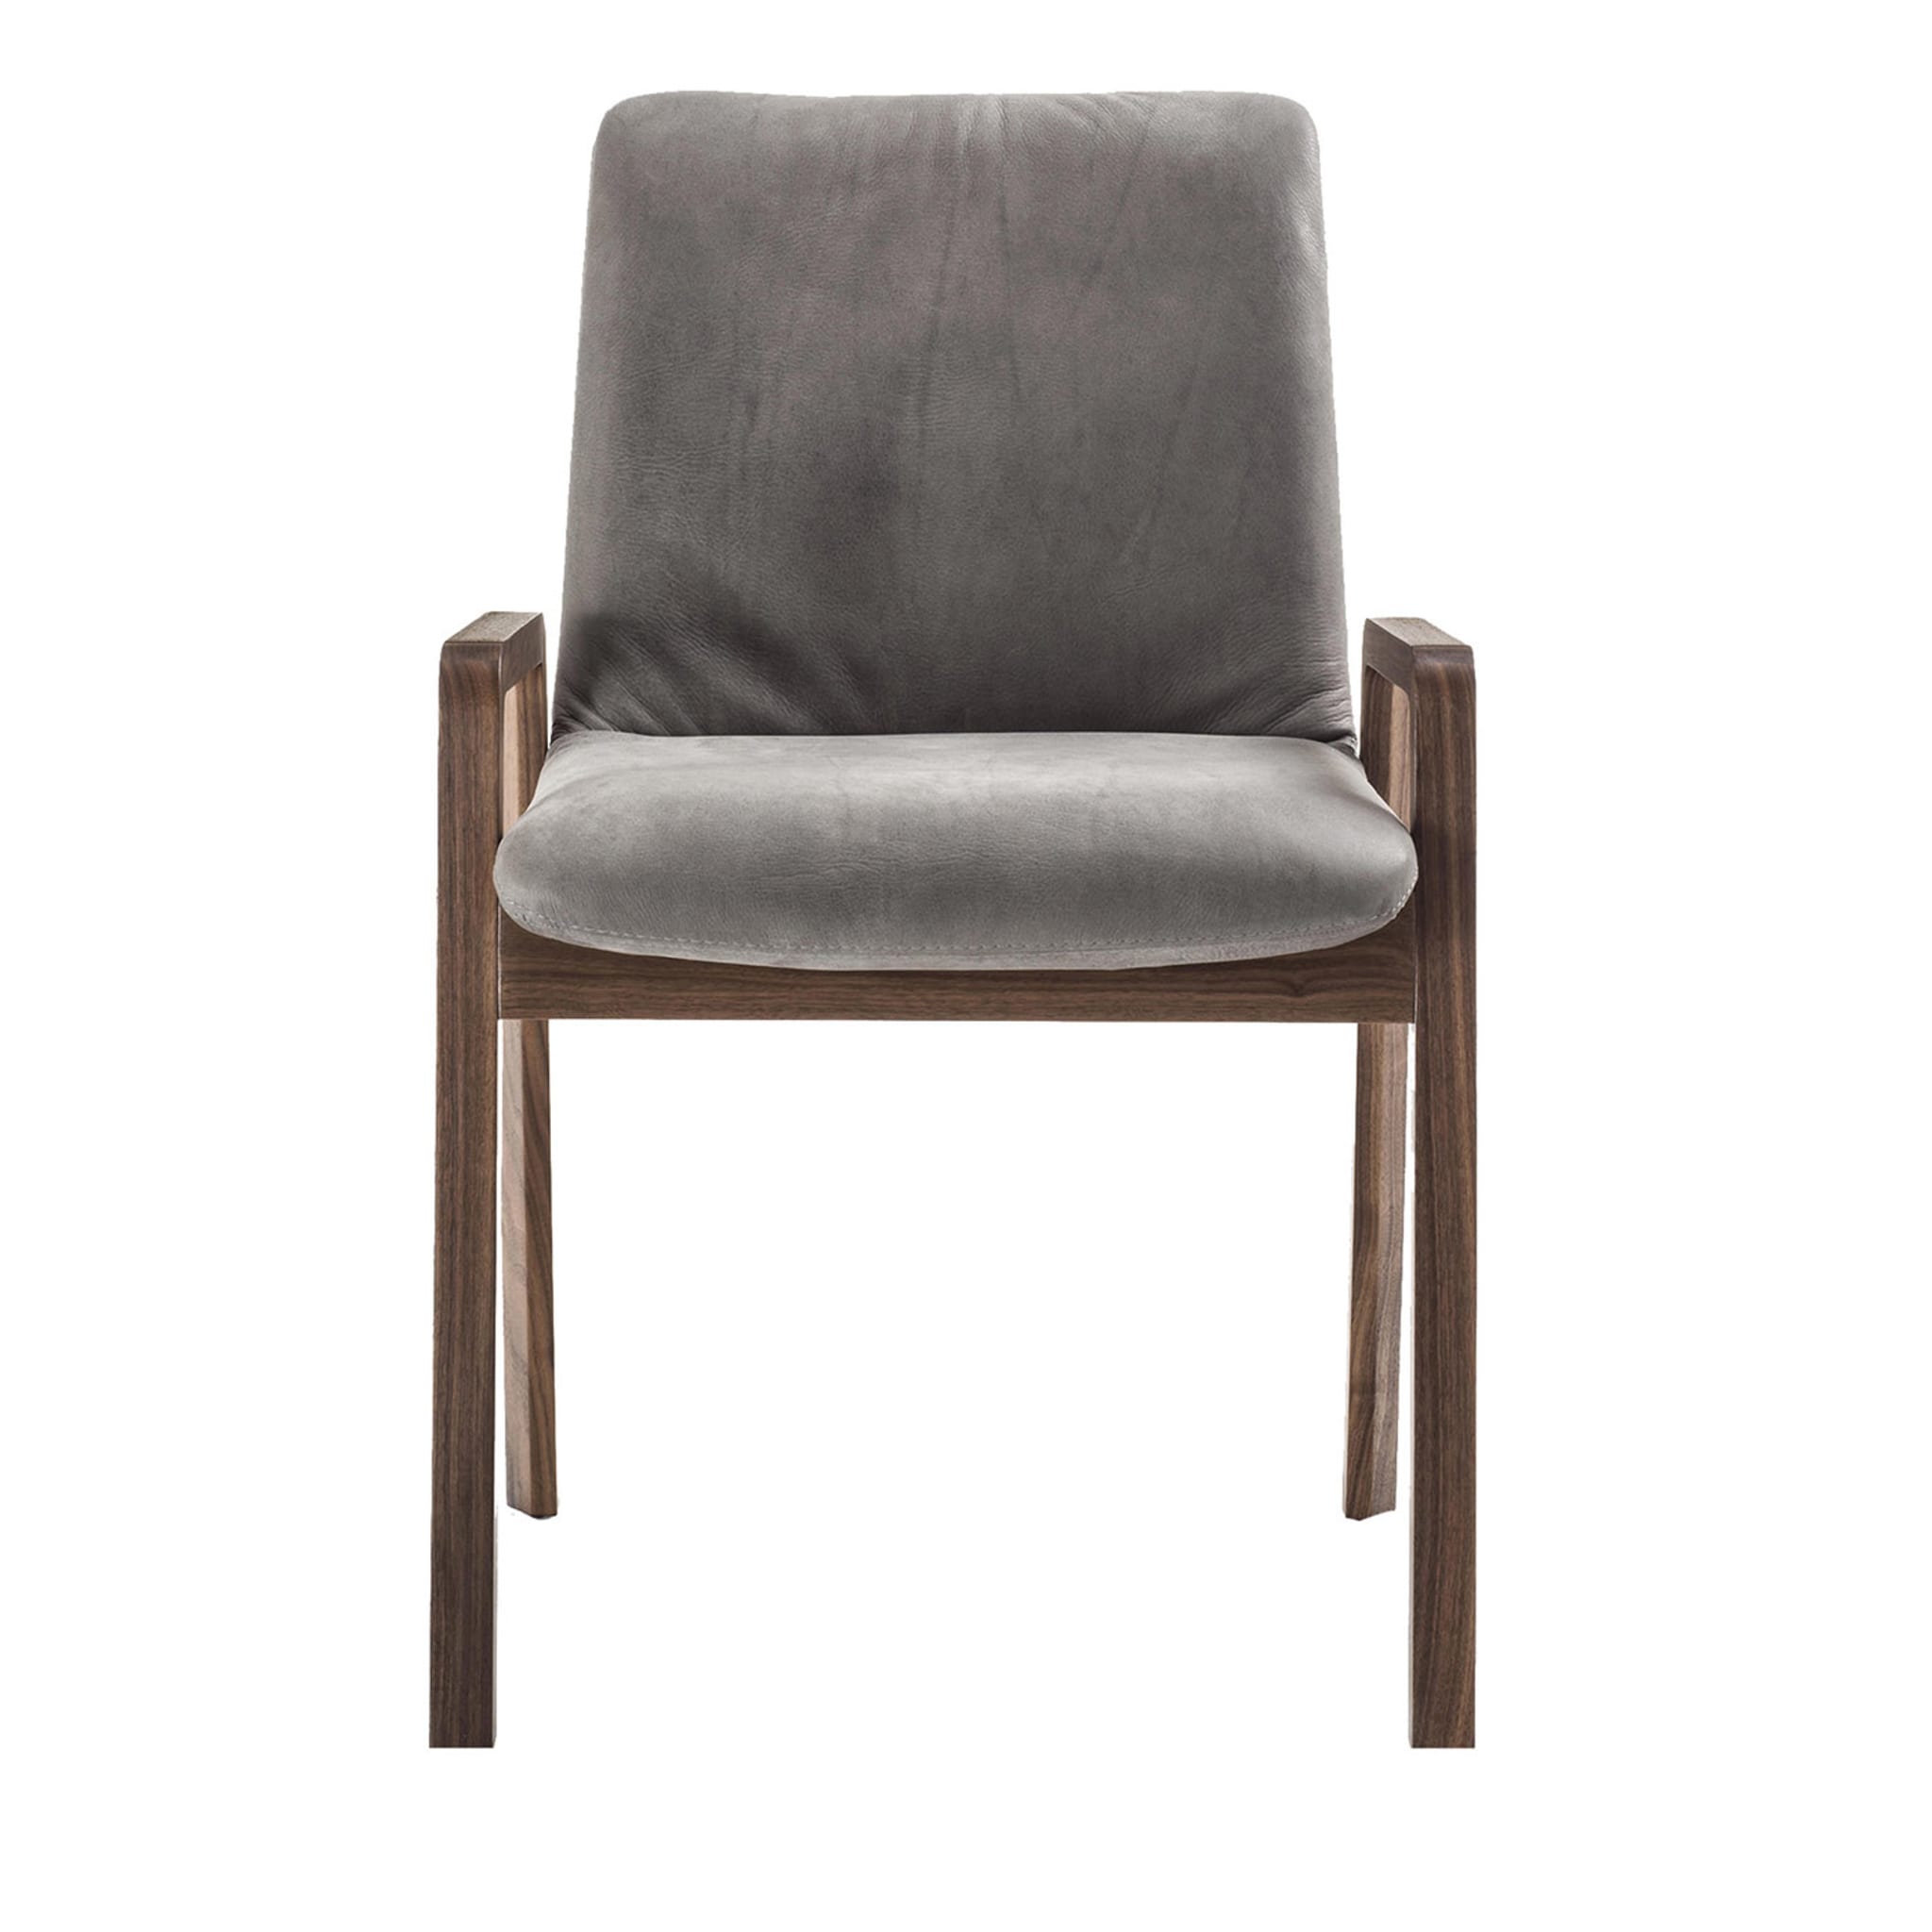 Noblé Gray Chair With Arms by Giuliano & Gabriele Cappelletti - Vue principale